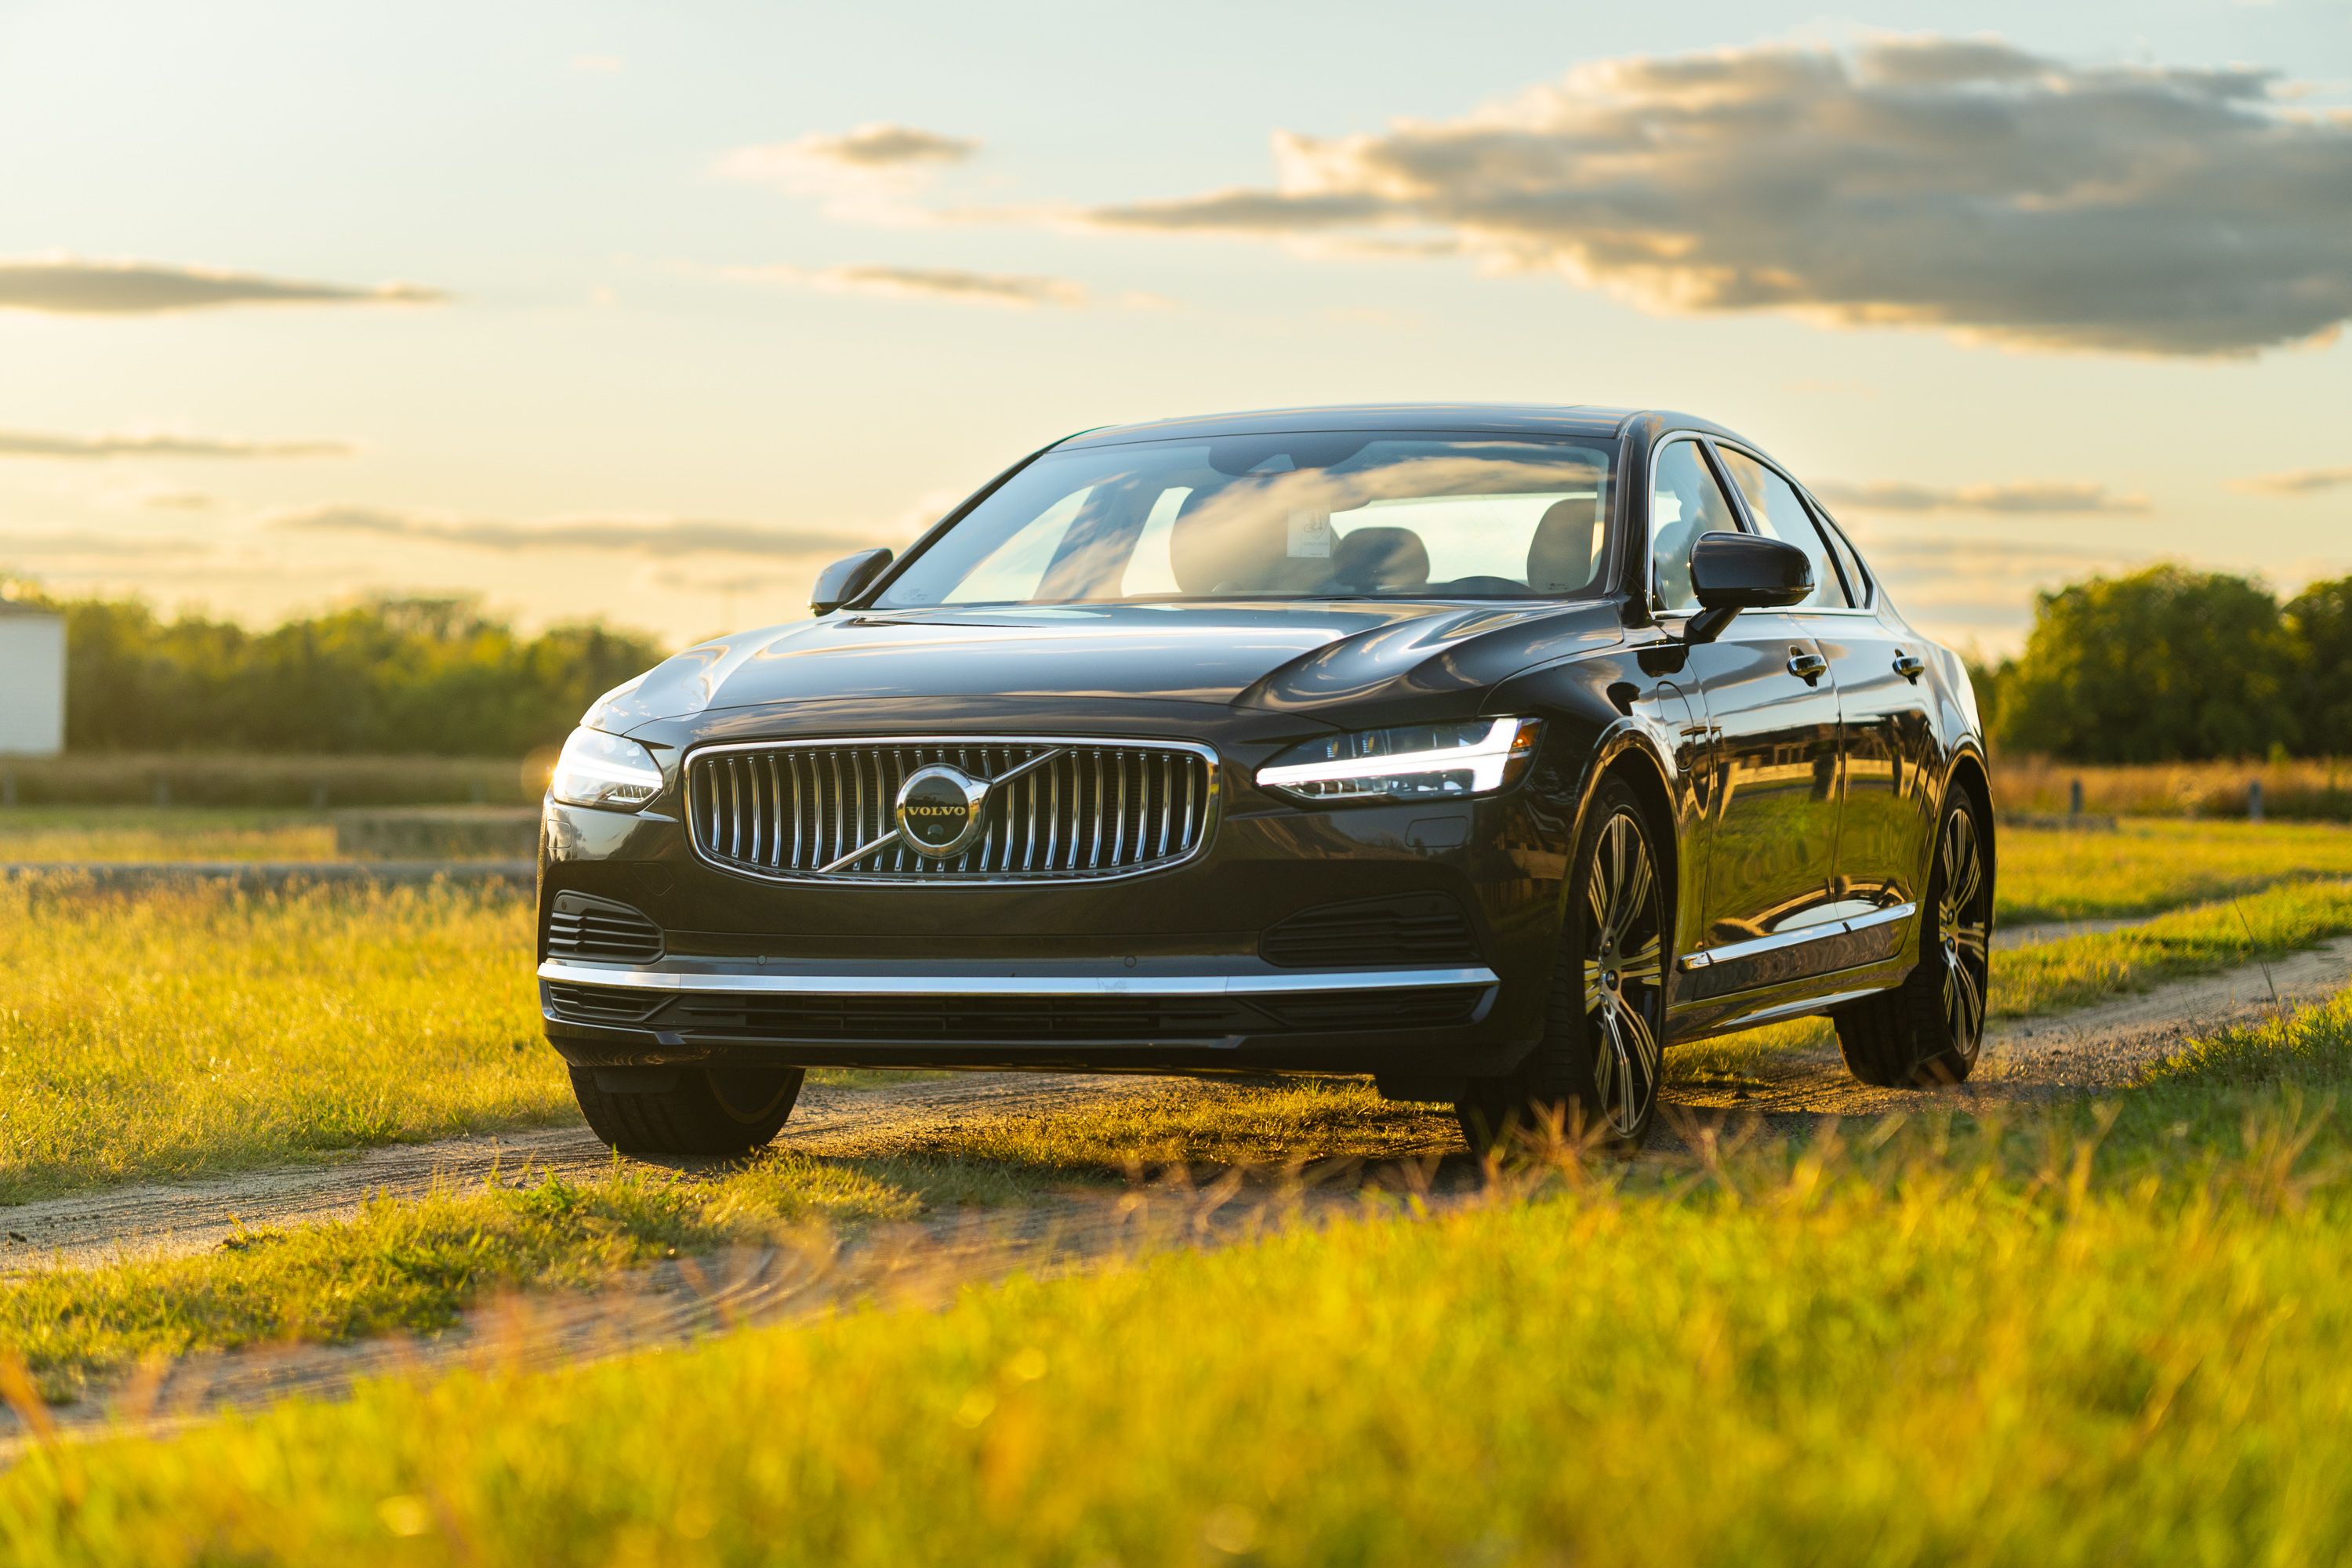 S90 Review: Frustratingly Close to Being Great